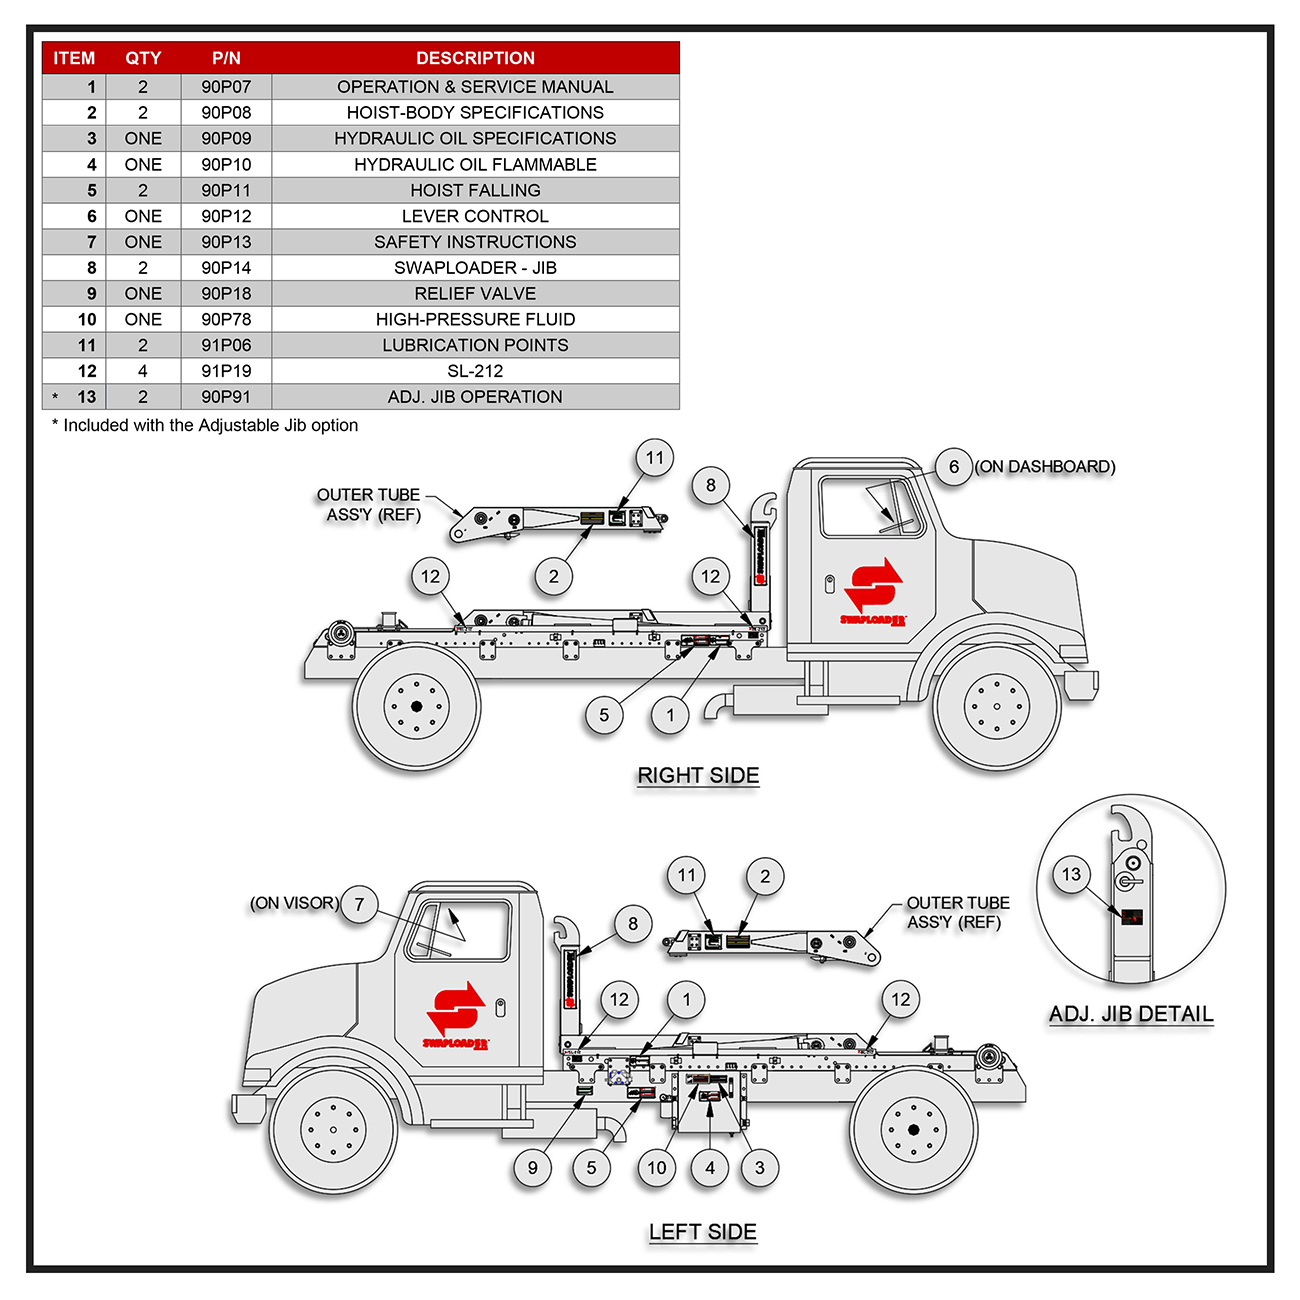 Swaploader SL-212 Decal Assembly Diagram